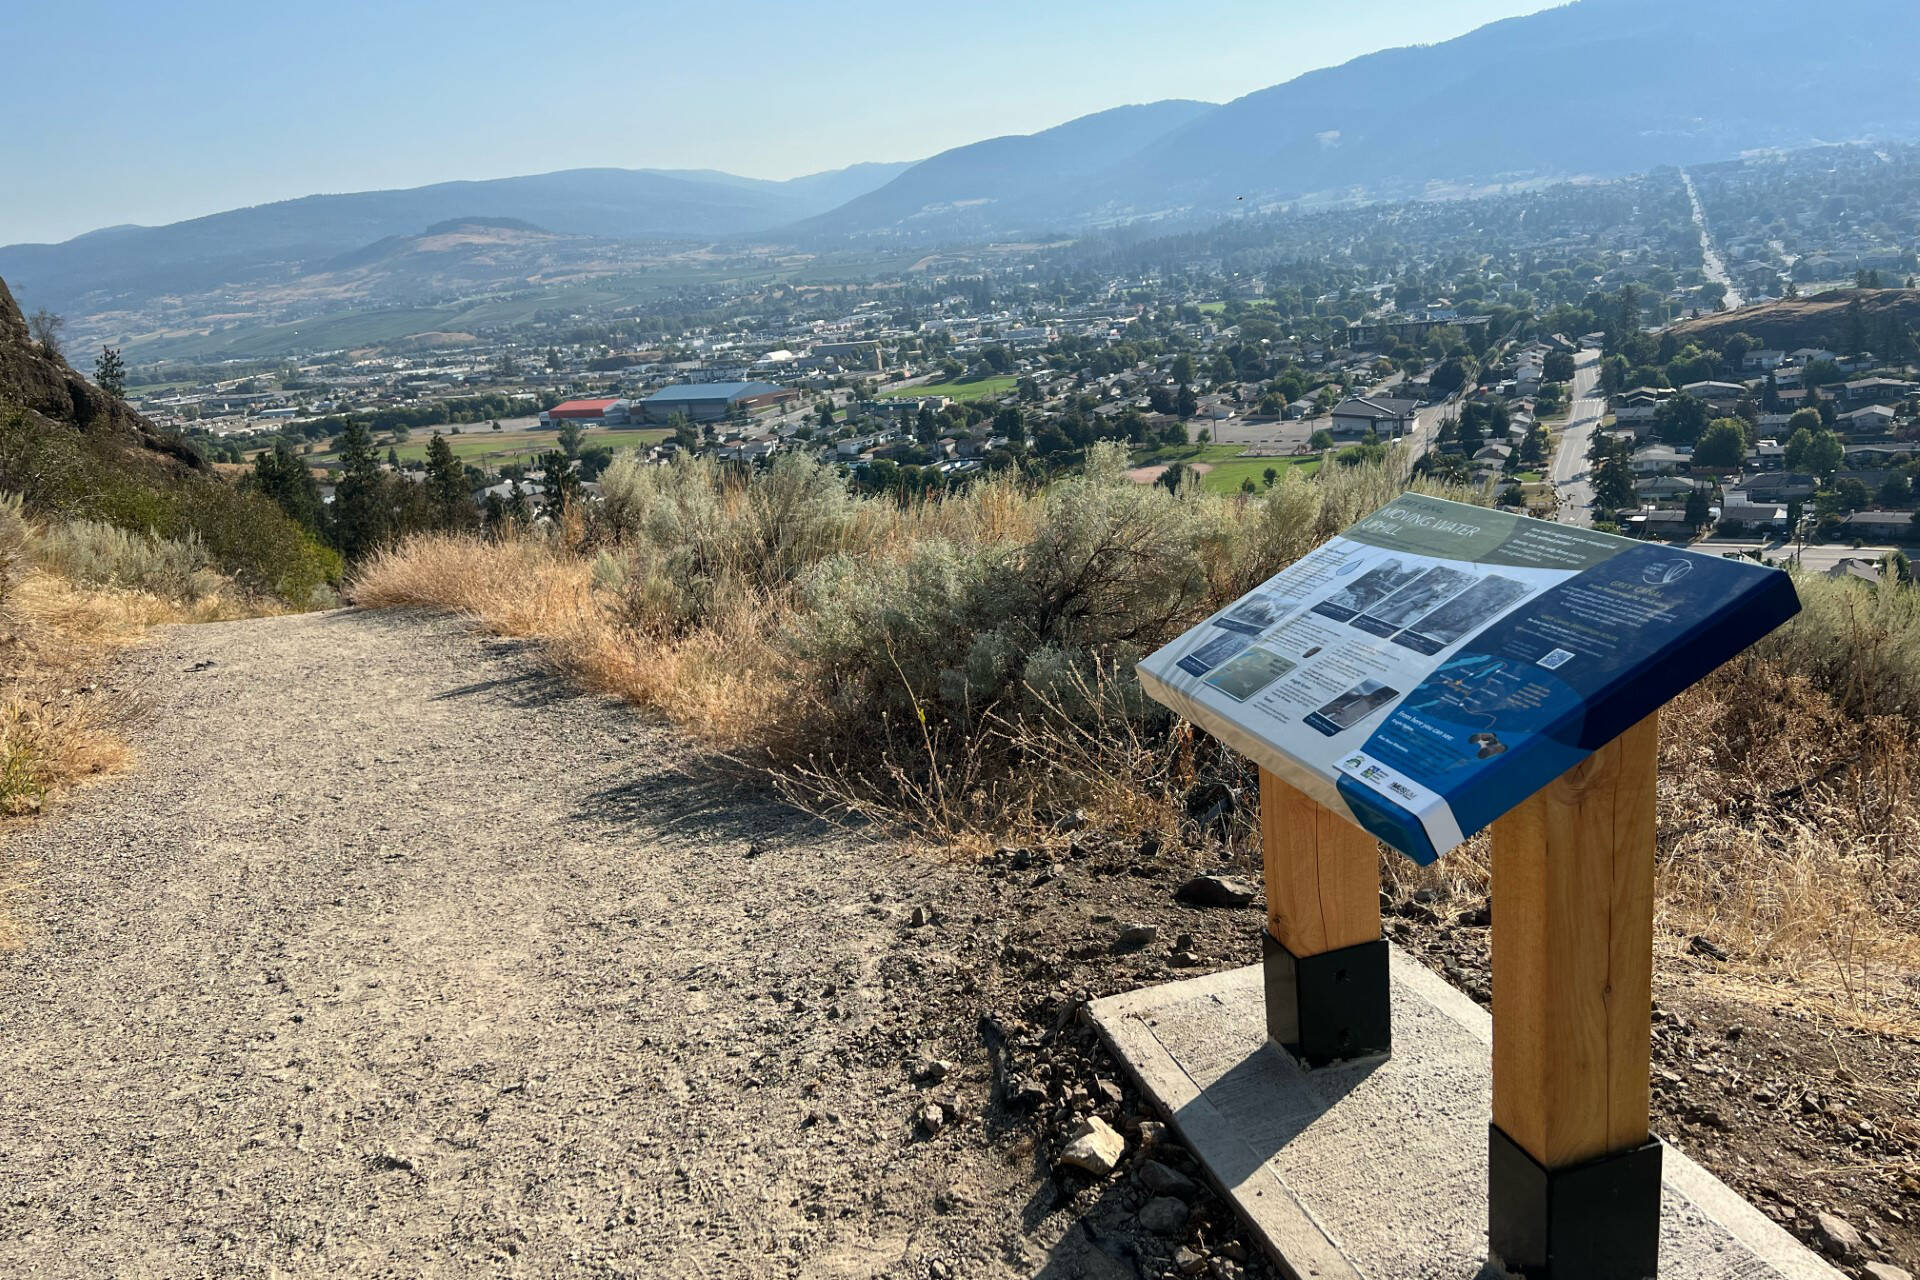 Grey Canal Turtle Mountain trail offers wide views of Vernon. (ROGTS photo)